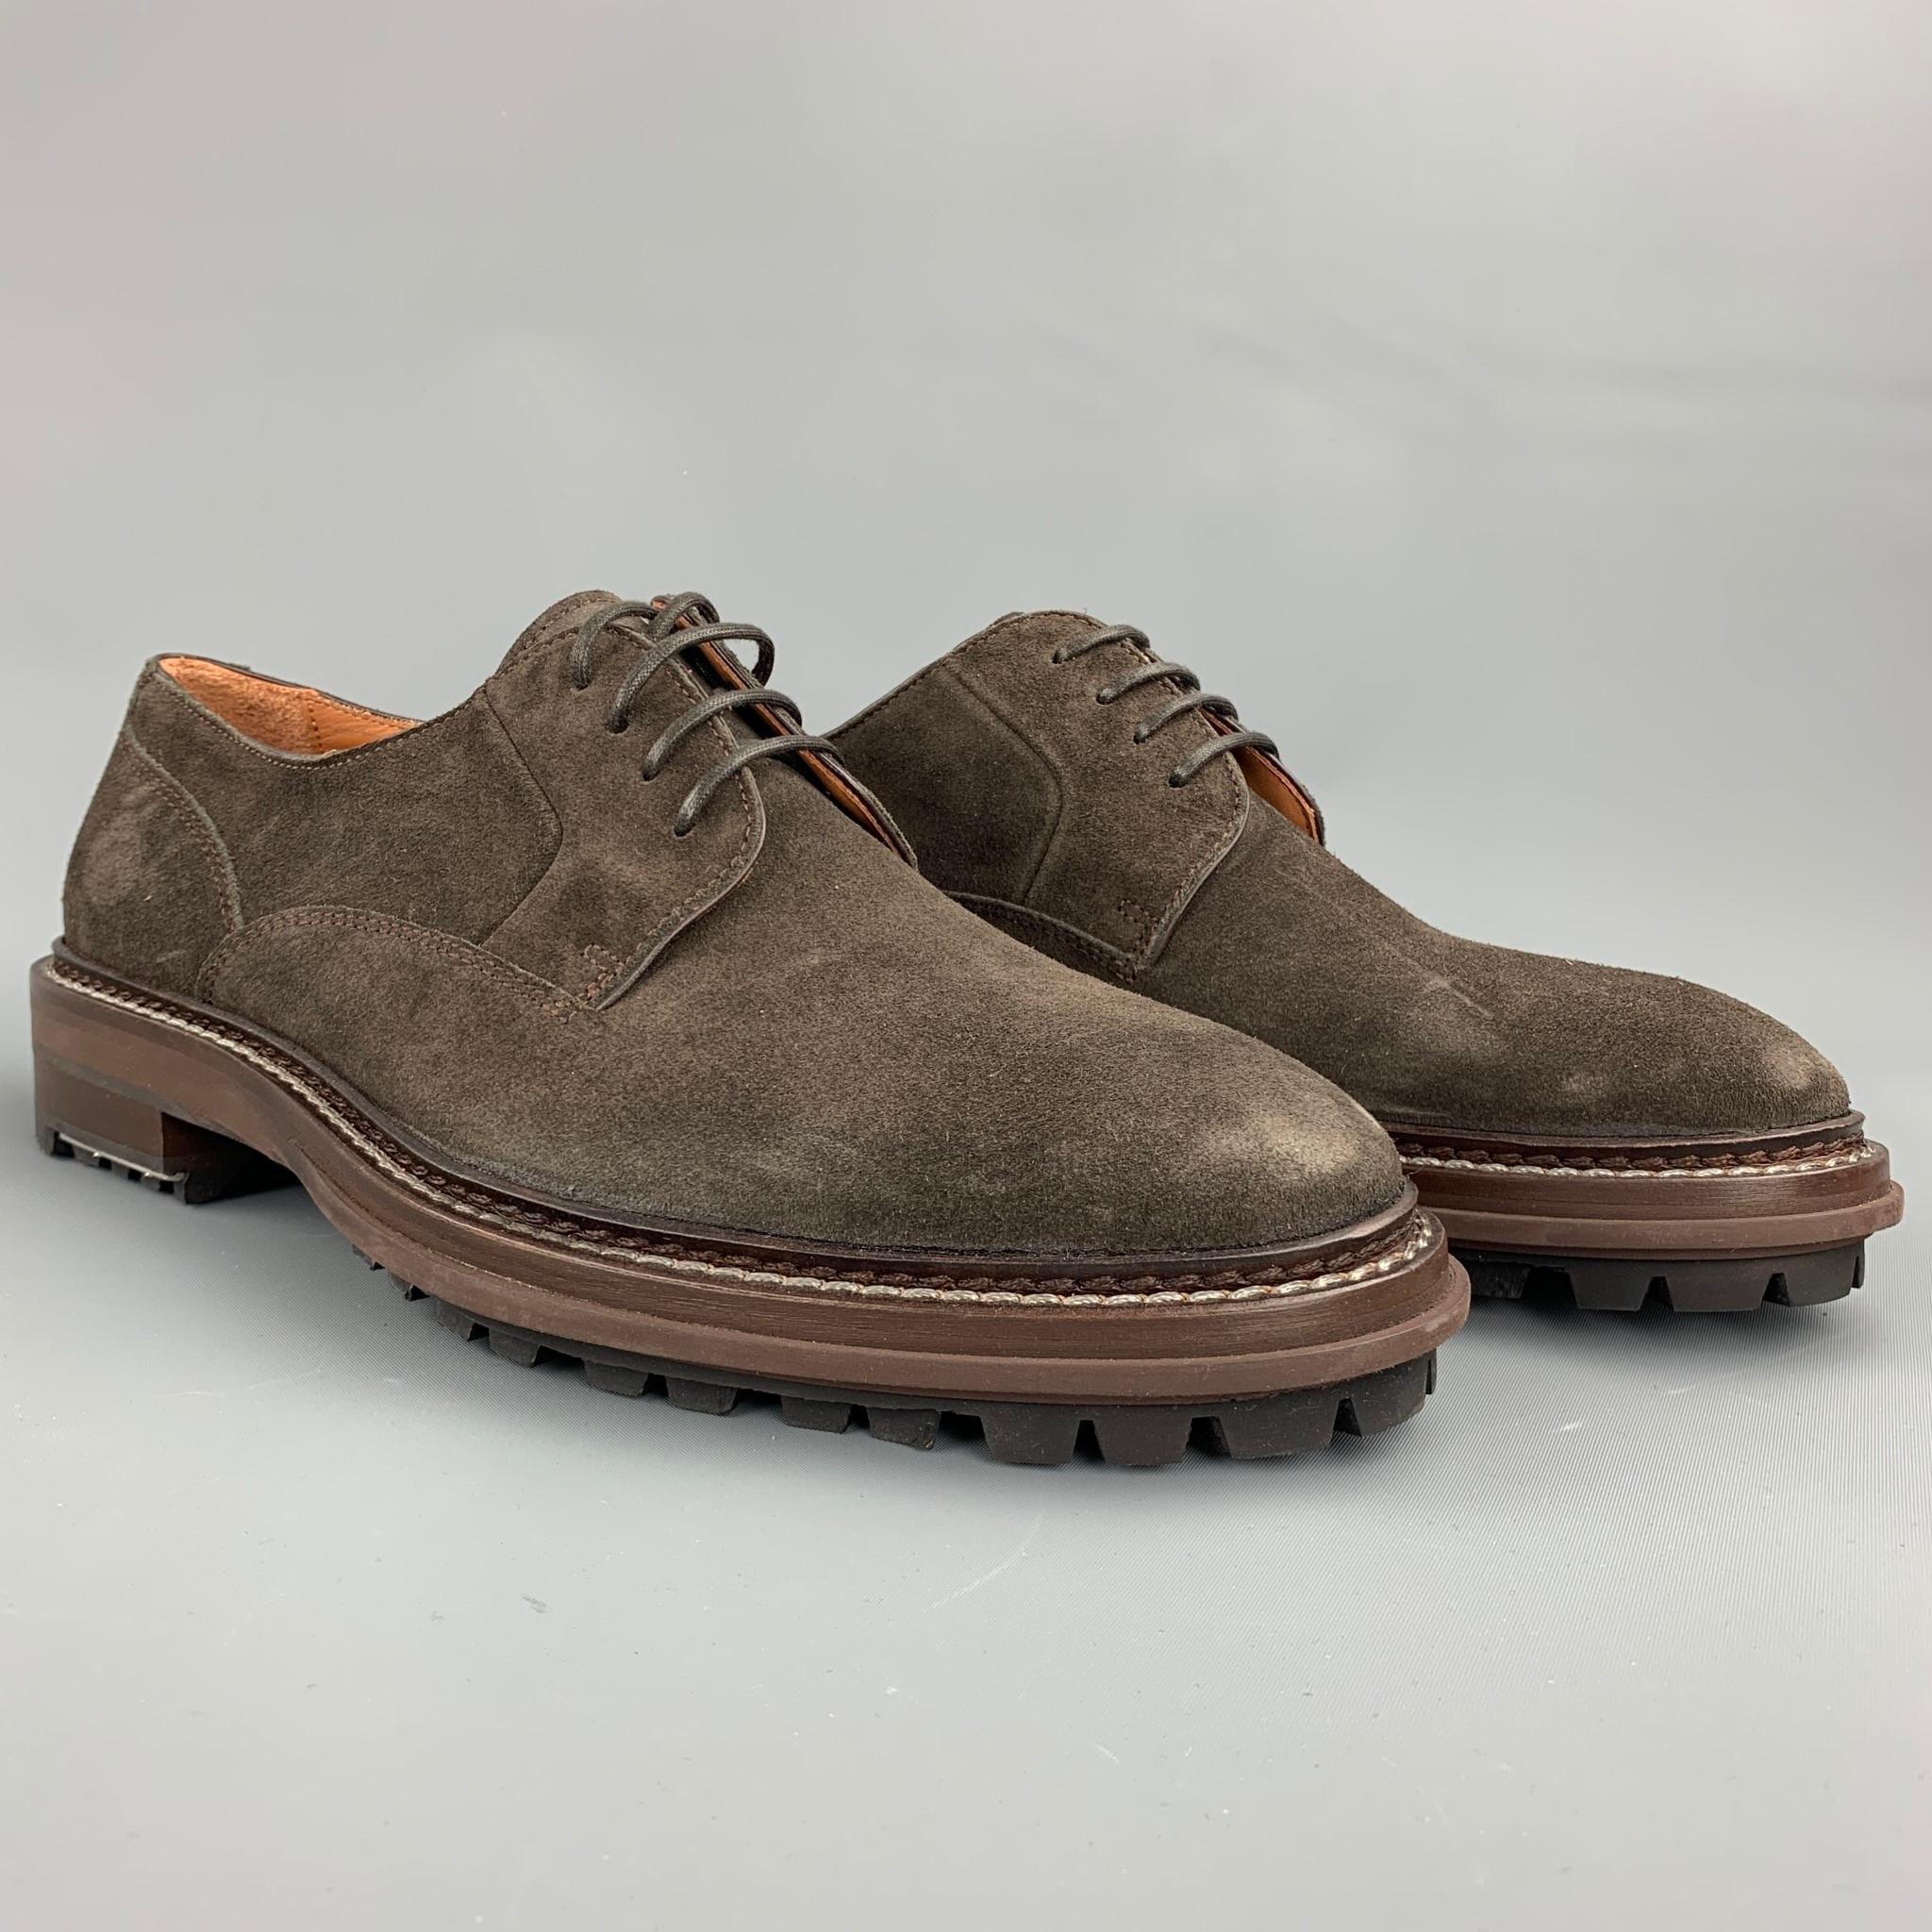 LANVIN shoes comes in a brown suede with a silver tone metal detail featuring a cap toe, lug sole, and a lace up closure. Minor wear. Made in Portugal.

Very Good Pre-Owned Condition.
Marked: 10

Outsole:

12.5 in. x 4 in. 

